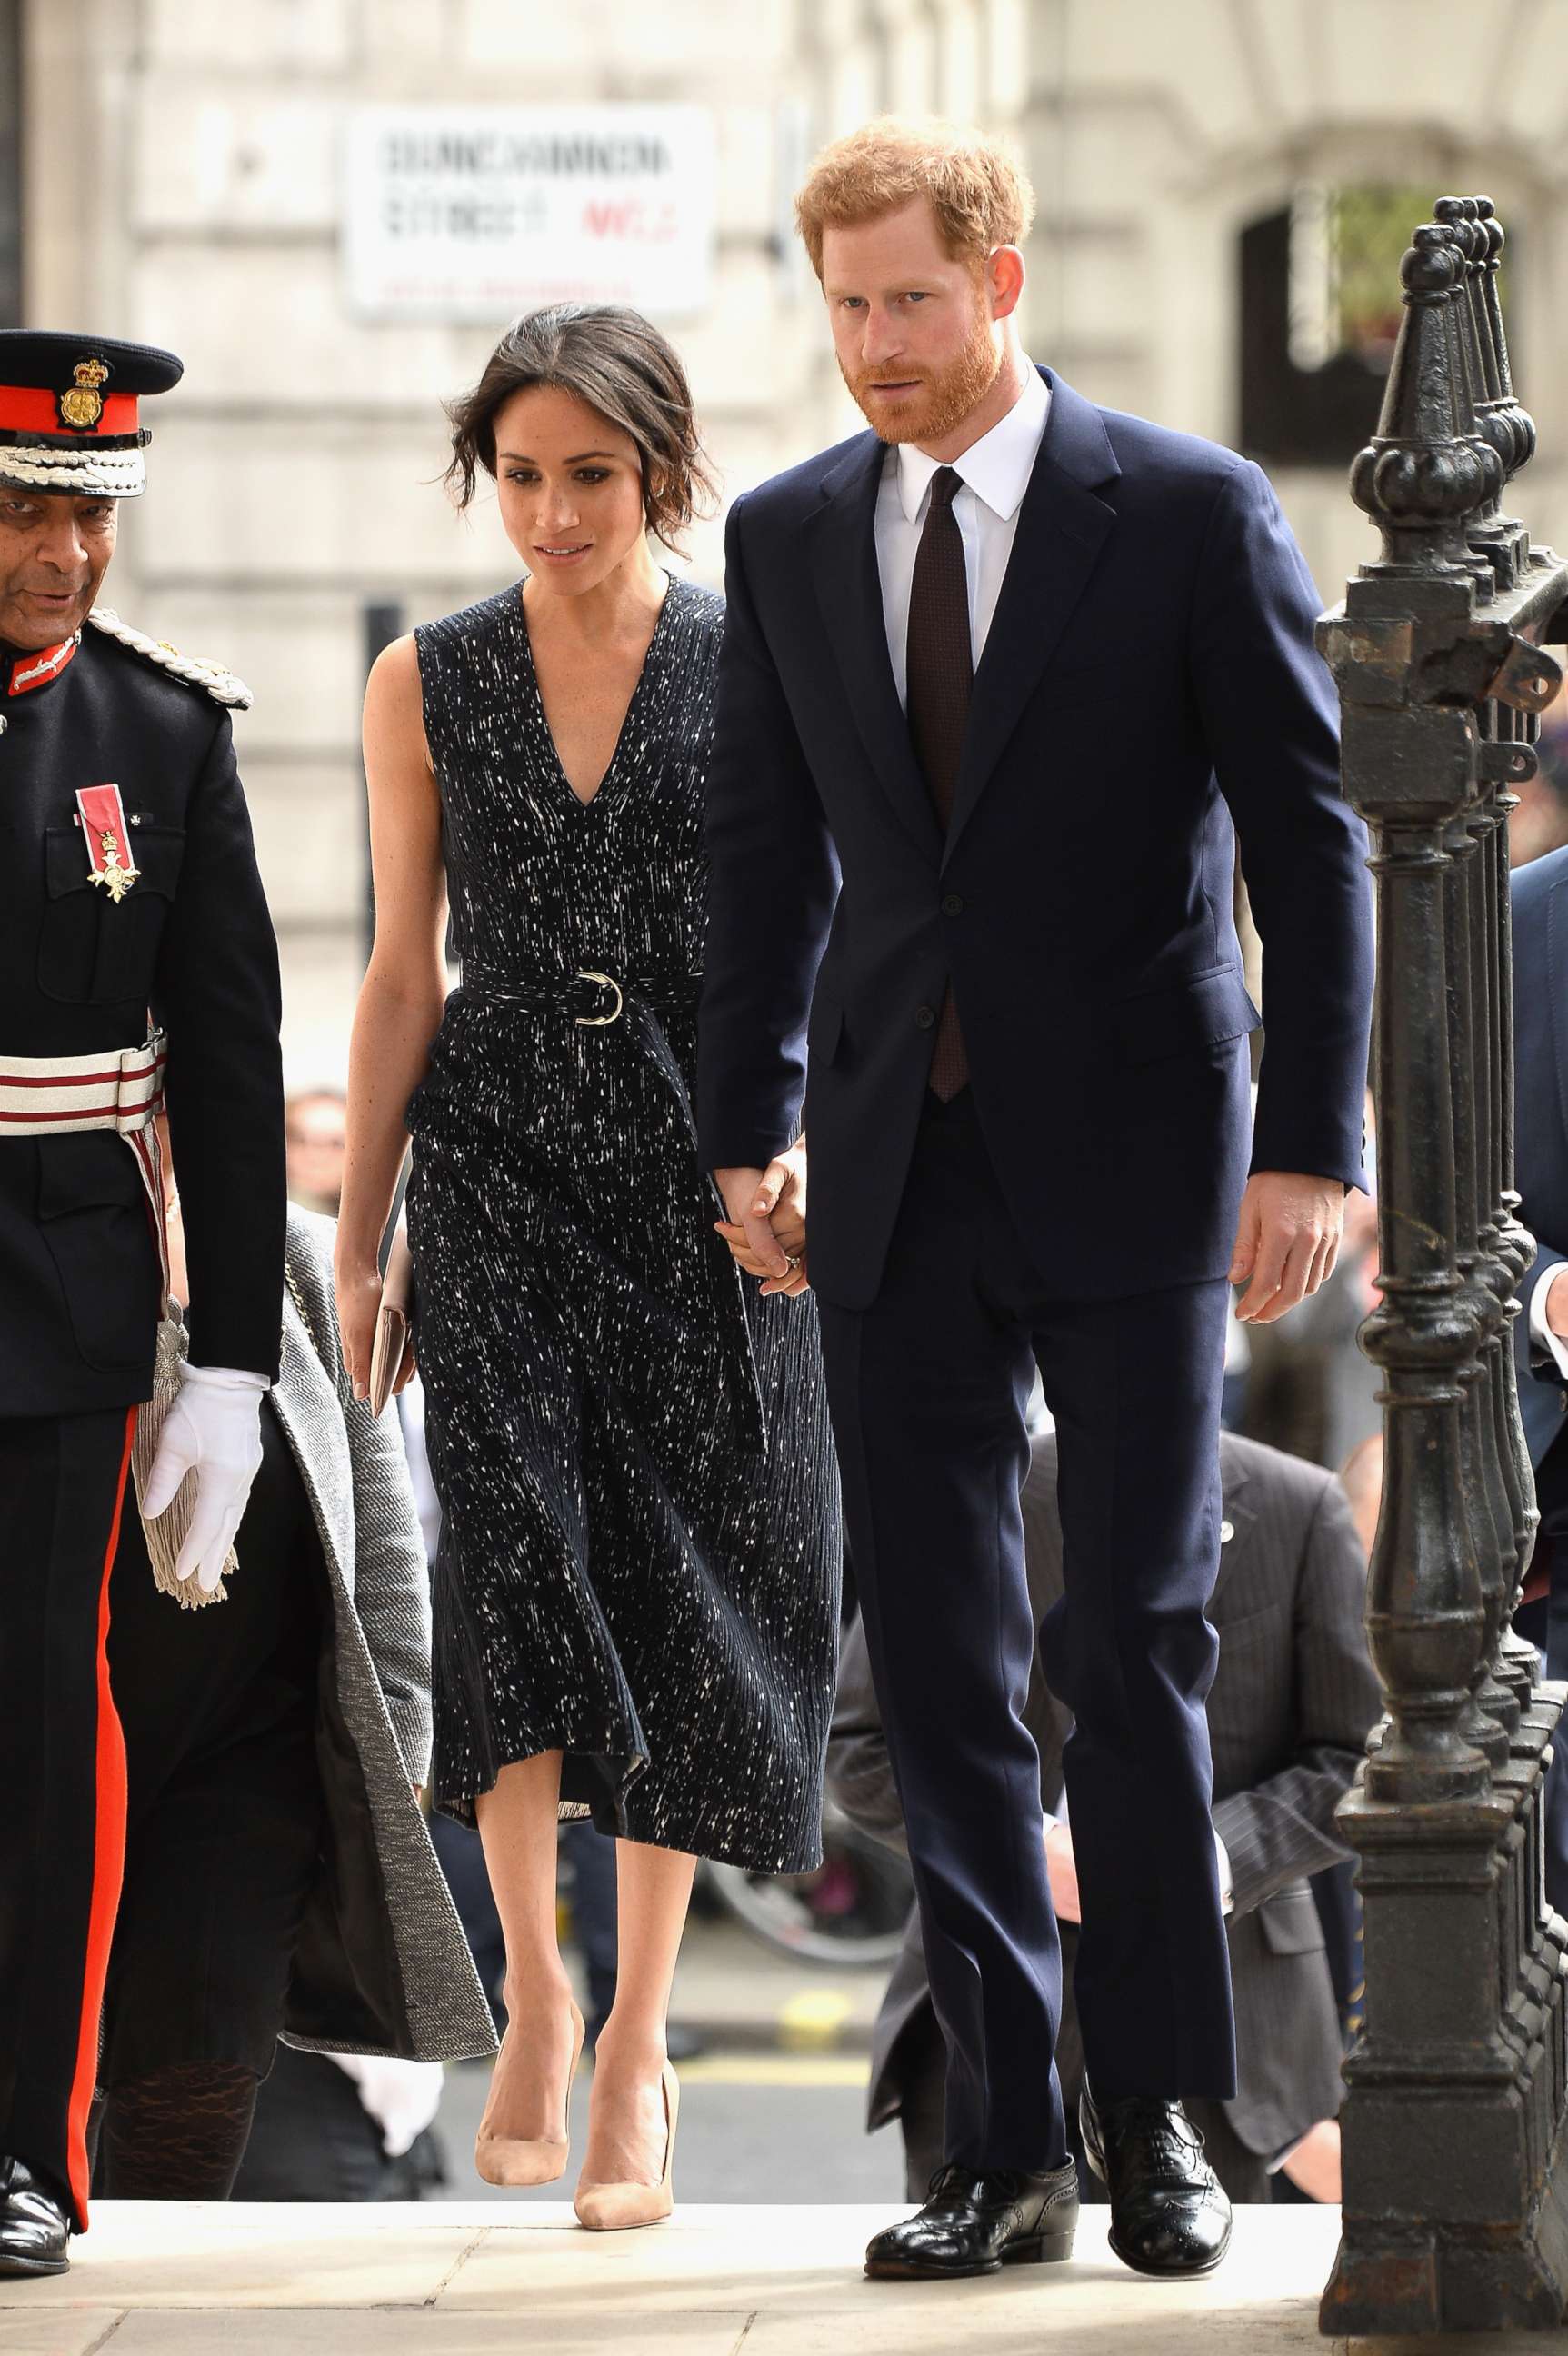 PHOTO: Prince Harry and Meghan Markle attend the 25th Anniversary Memorial Service to celebrate the life and legacy of Stephen Lawrence at St Martin-in-the-Fields, April 23, 2018, in London.